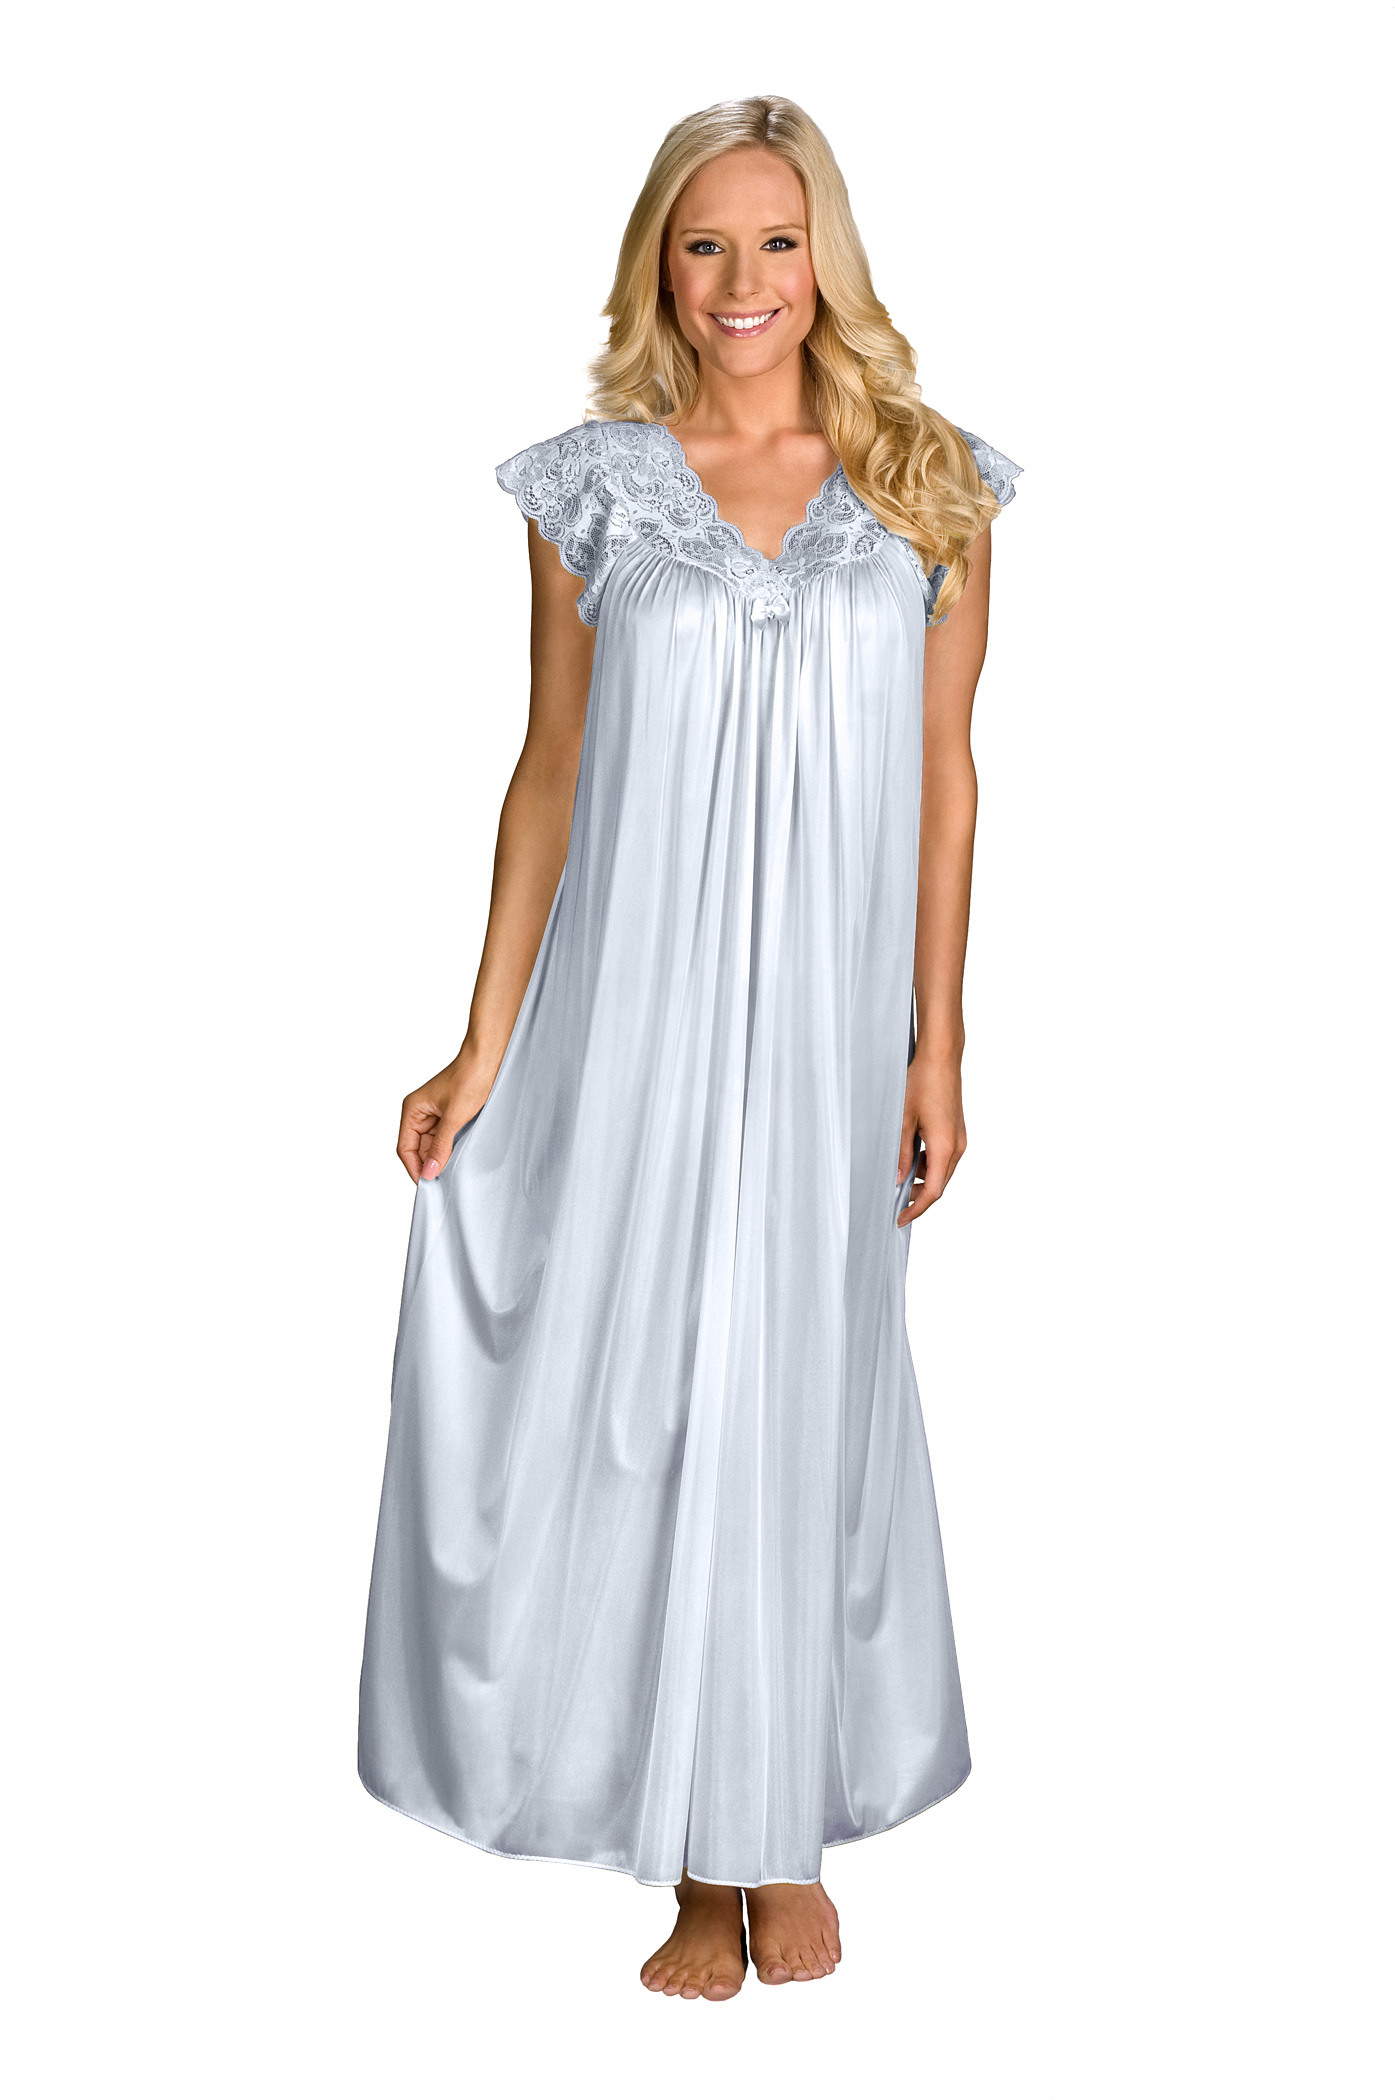 nightgown - Online Discount Shop for Electronics, Apparel, Toys, Books